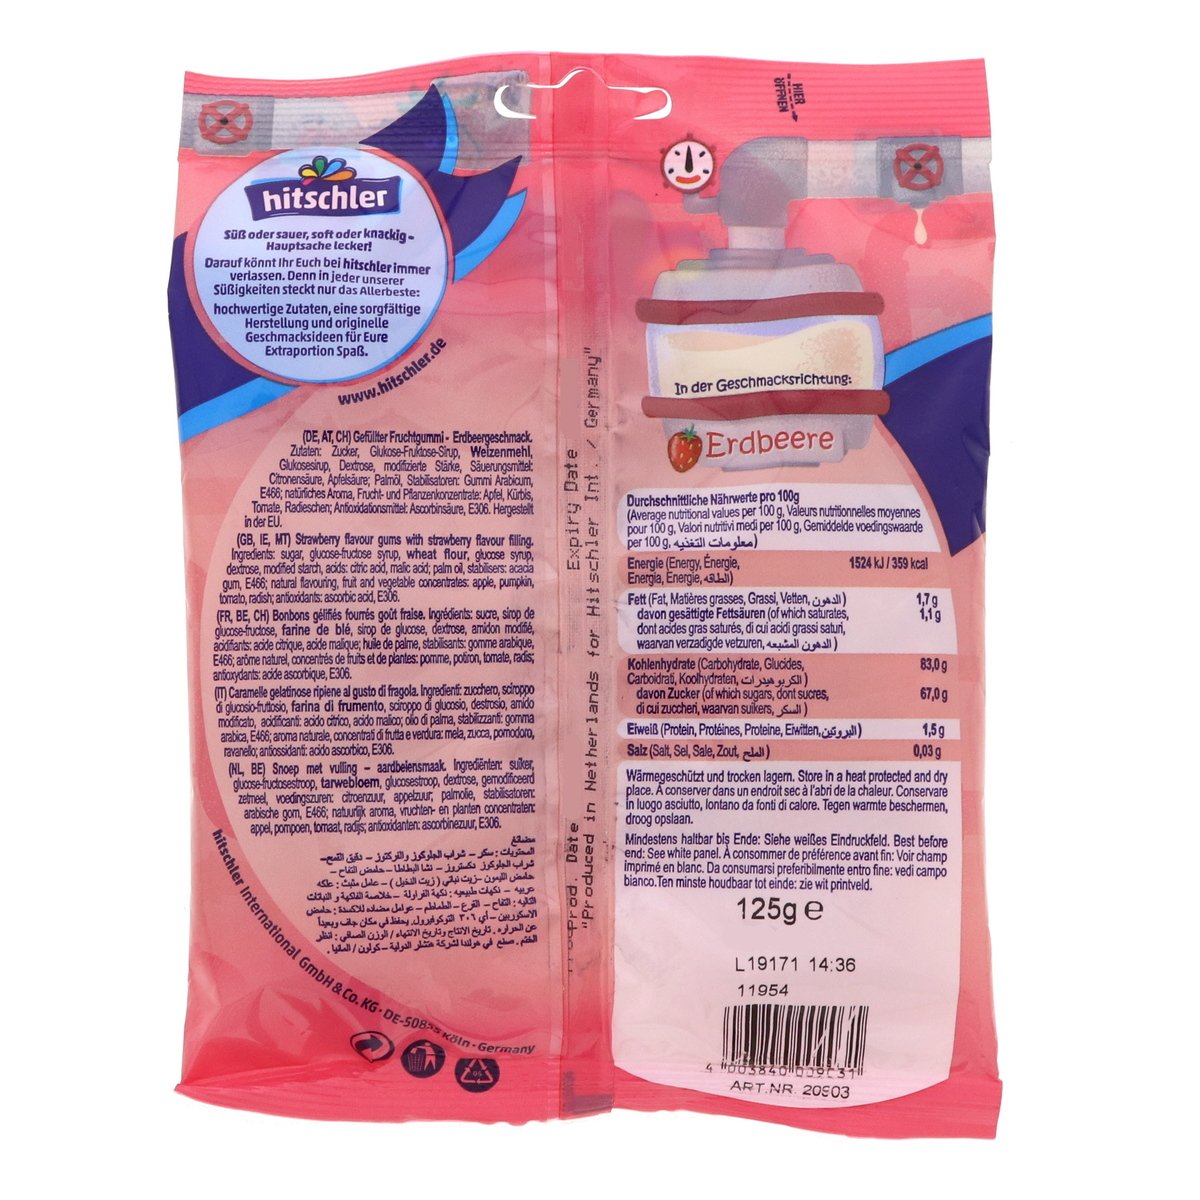 Hitschler Strawberry Flavour Gums with Strawberry Flavour Filling 125 g